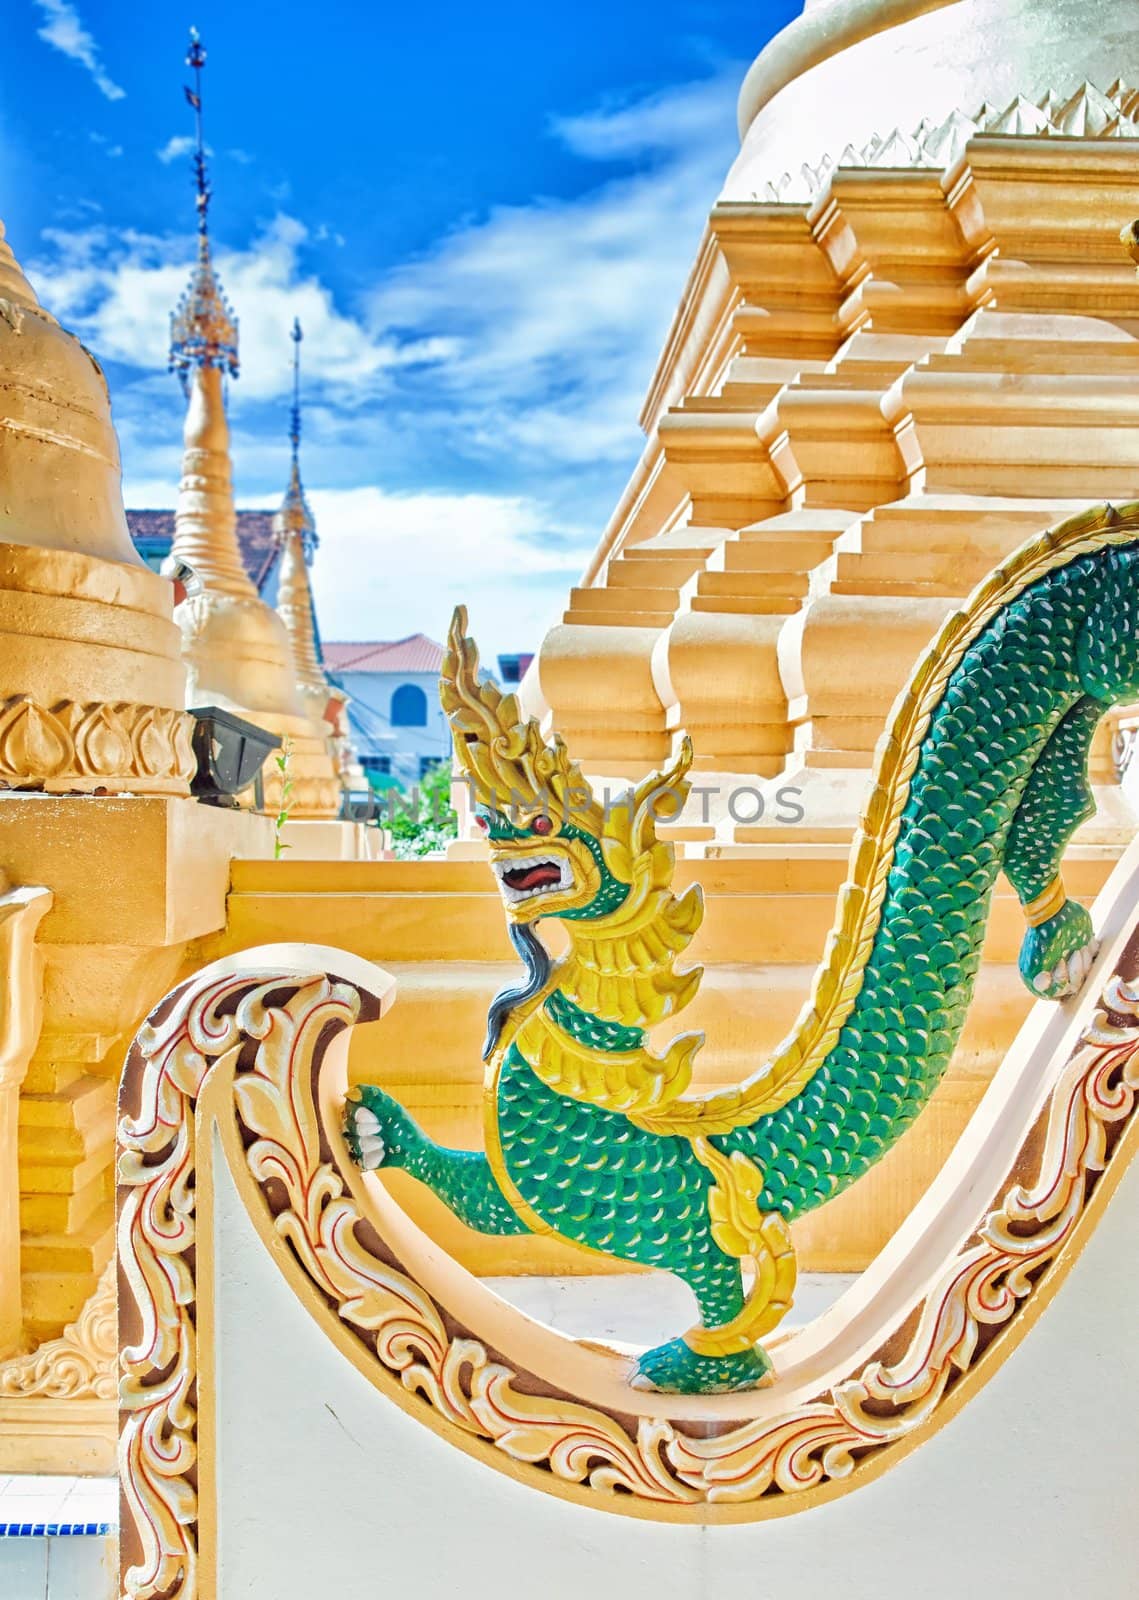 dragon statue in buddhist temple in penang malaysia